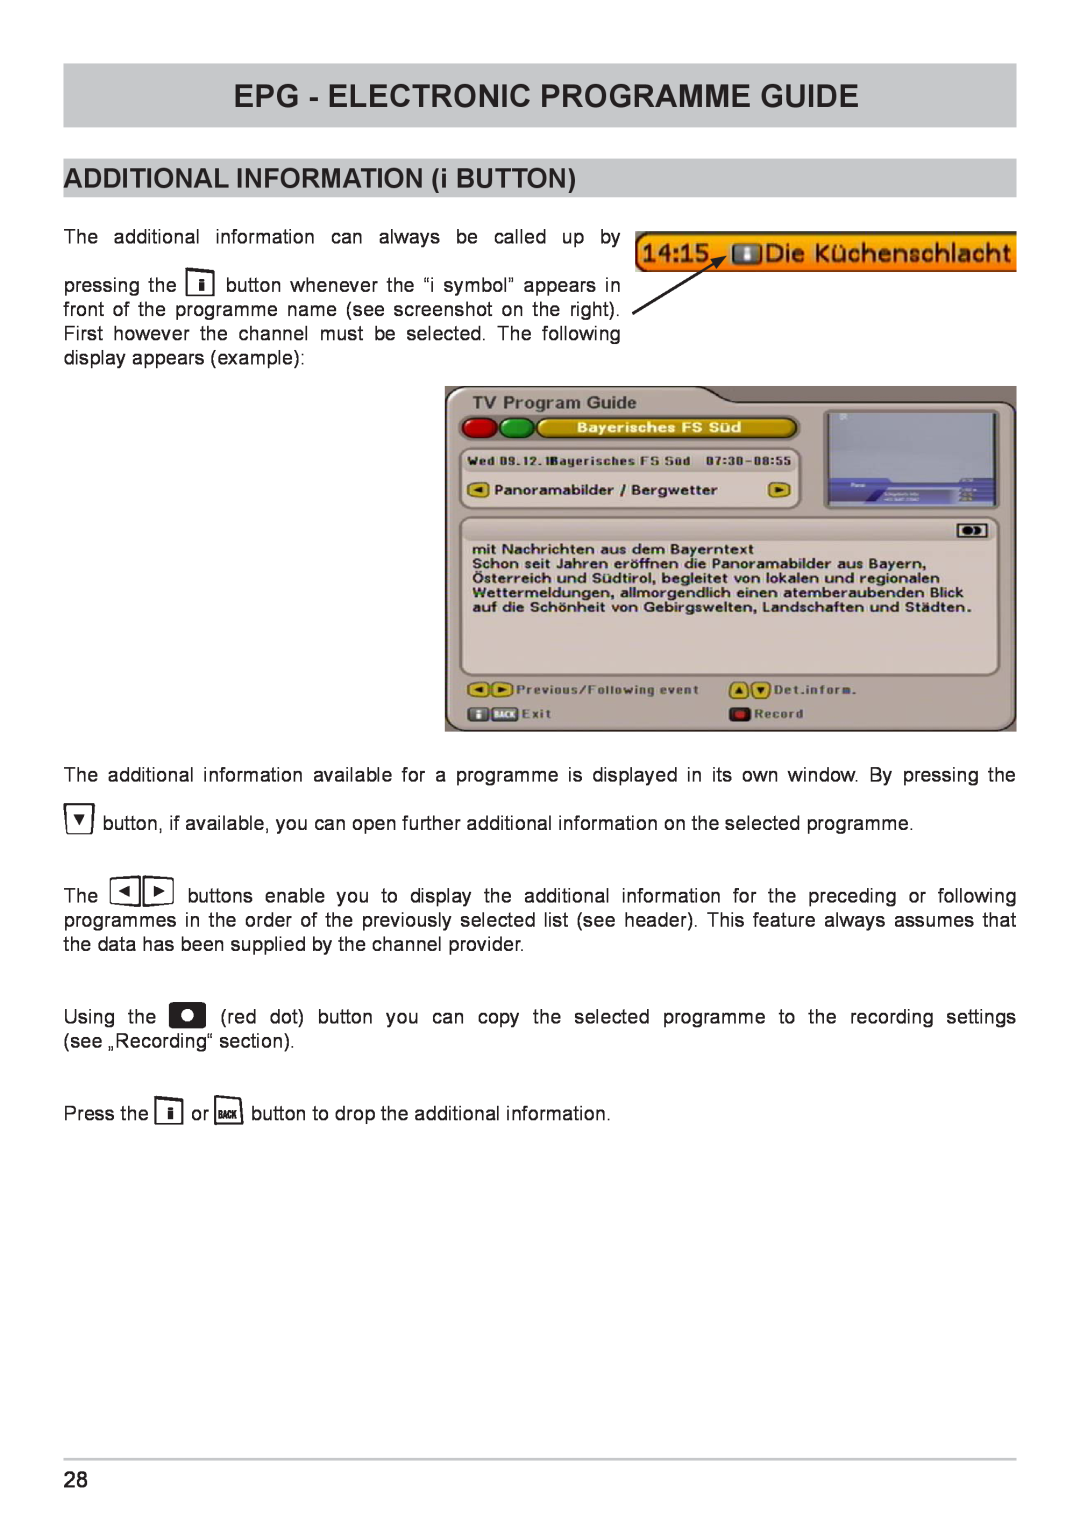 Kathrein UFC 662sw manual ADDITIONAL INFORMATION i BUTTON, Epg - Electronic Programme Guide 